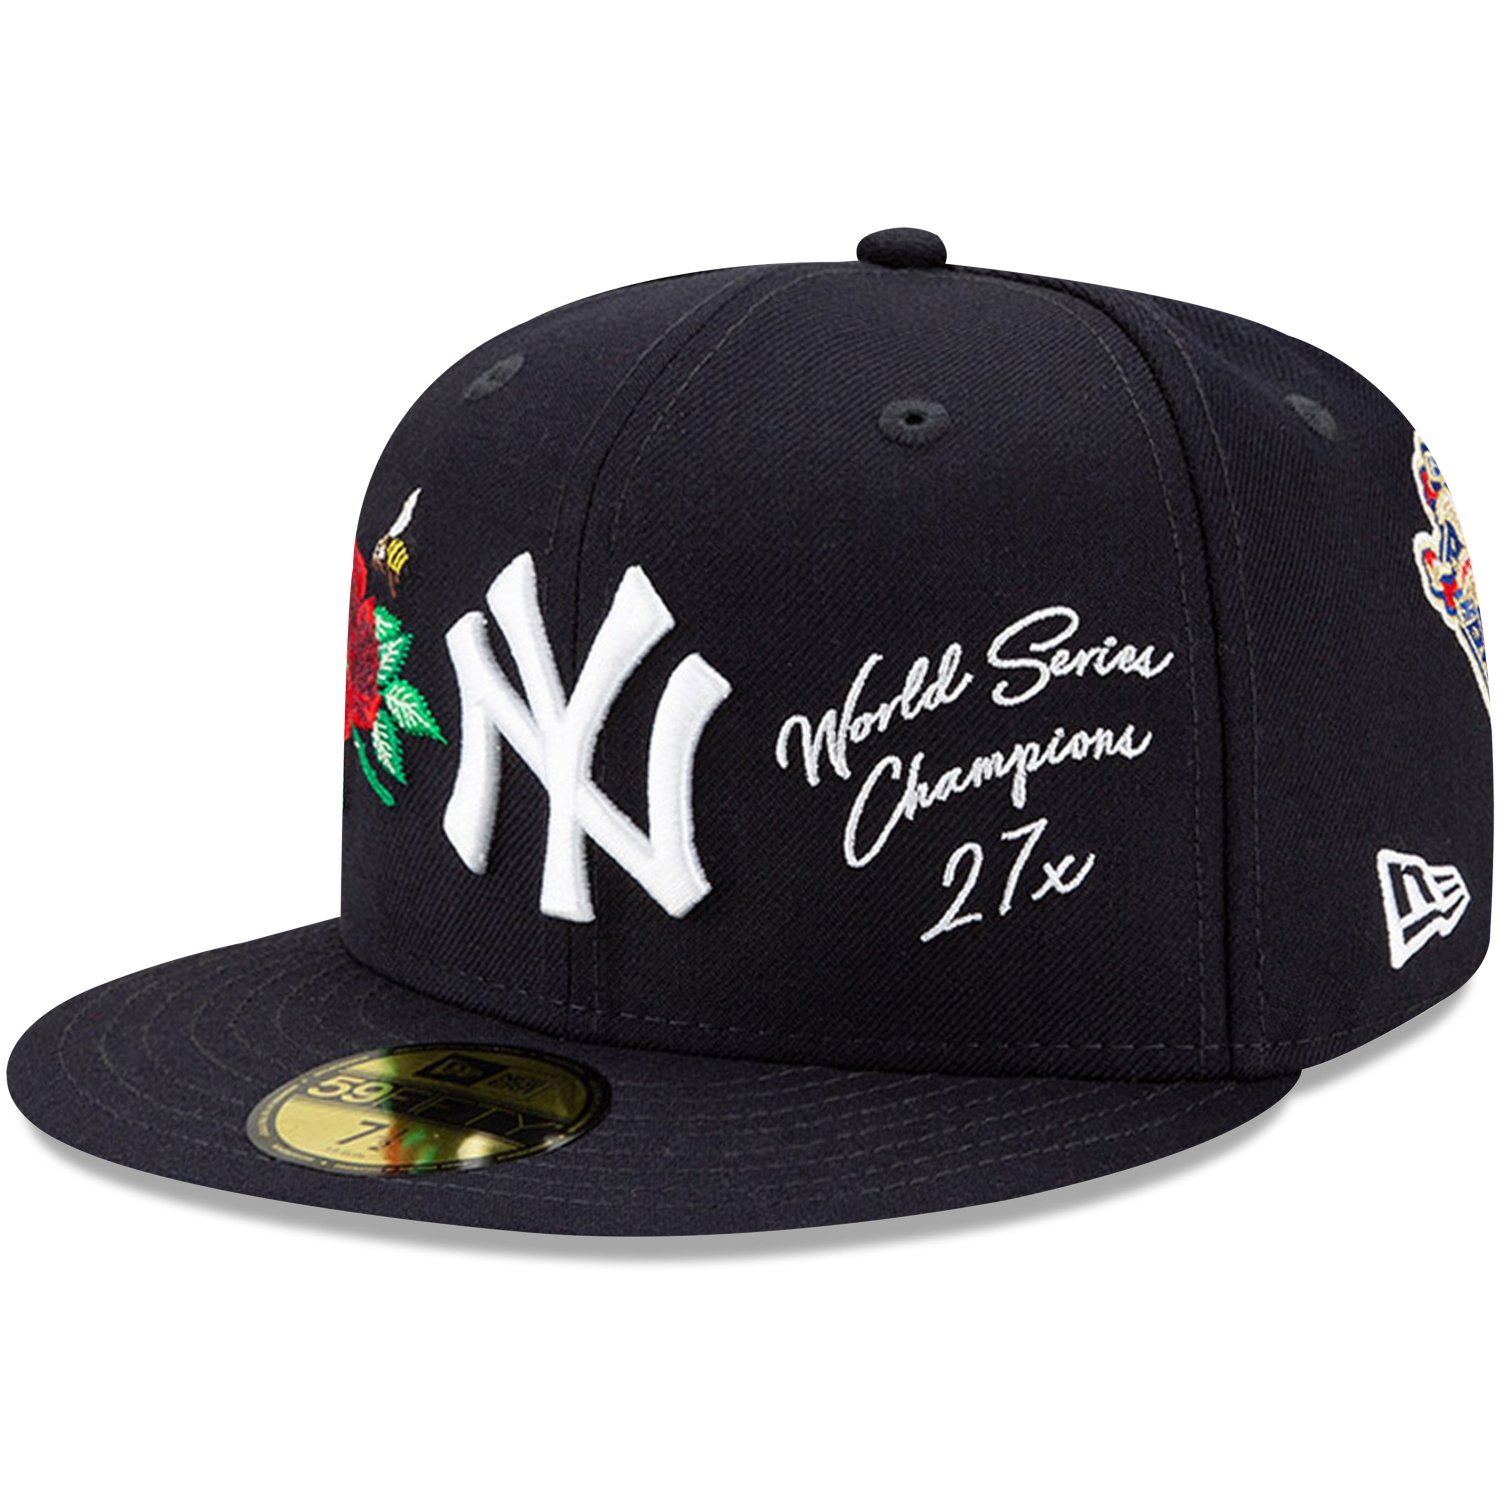 New Era 59Fifty Fitted Cap - MULTI GRAPHIC New York Yankees - 7 1/2 :  : Fashion